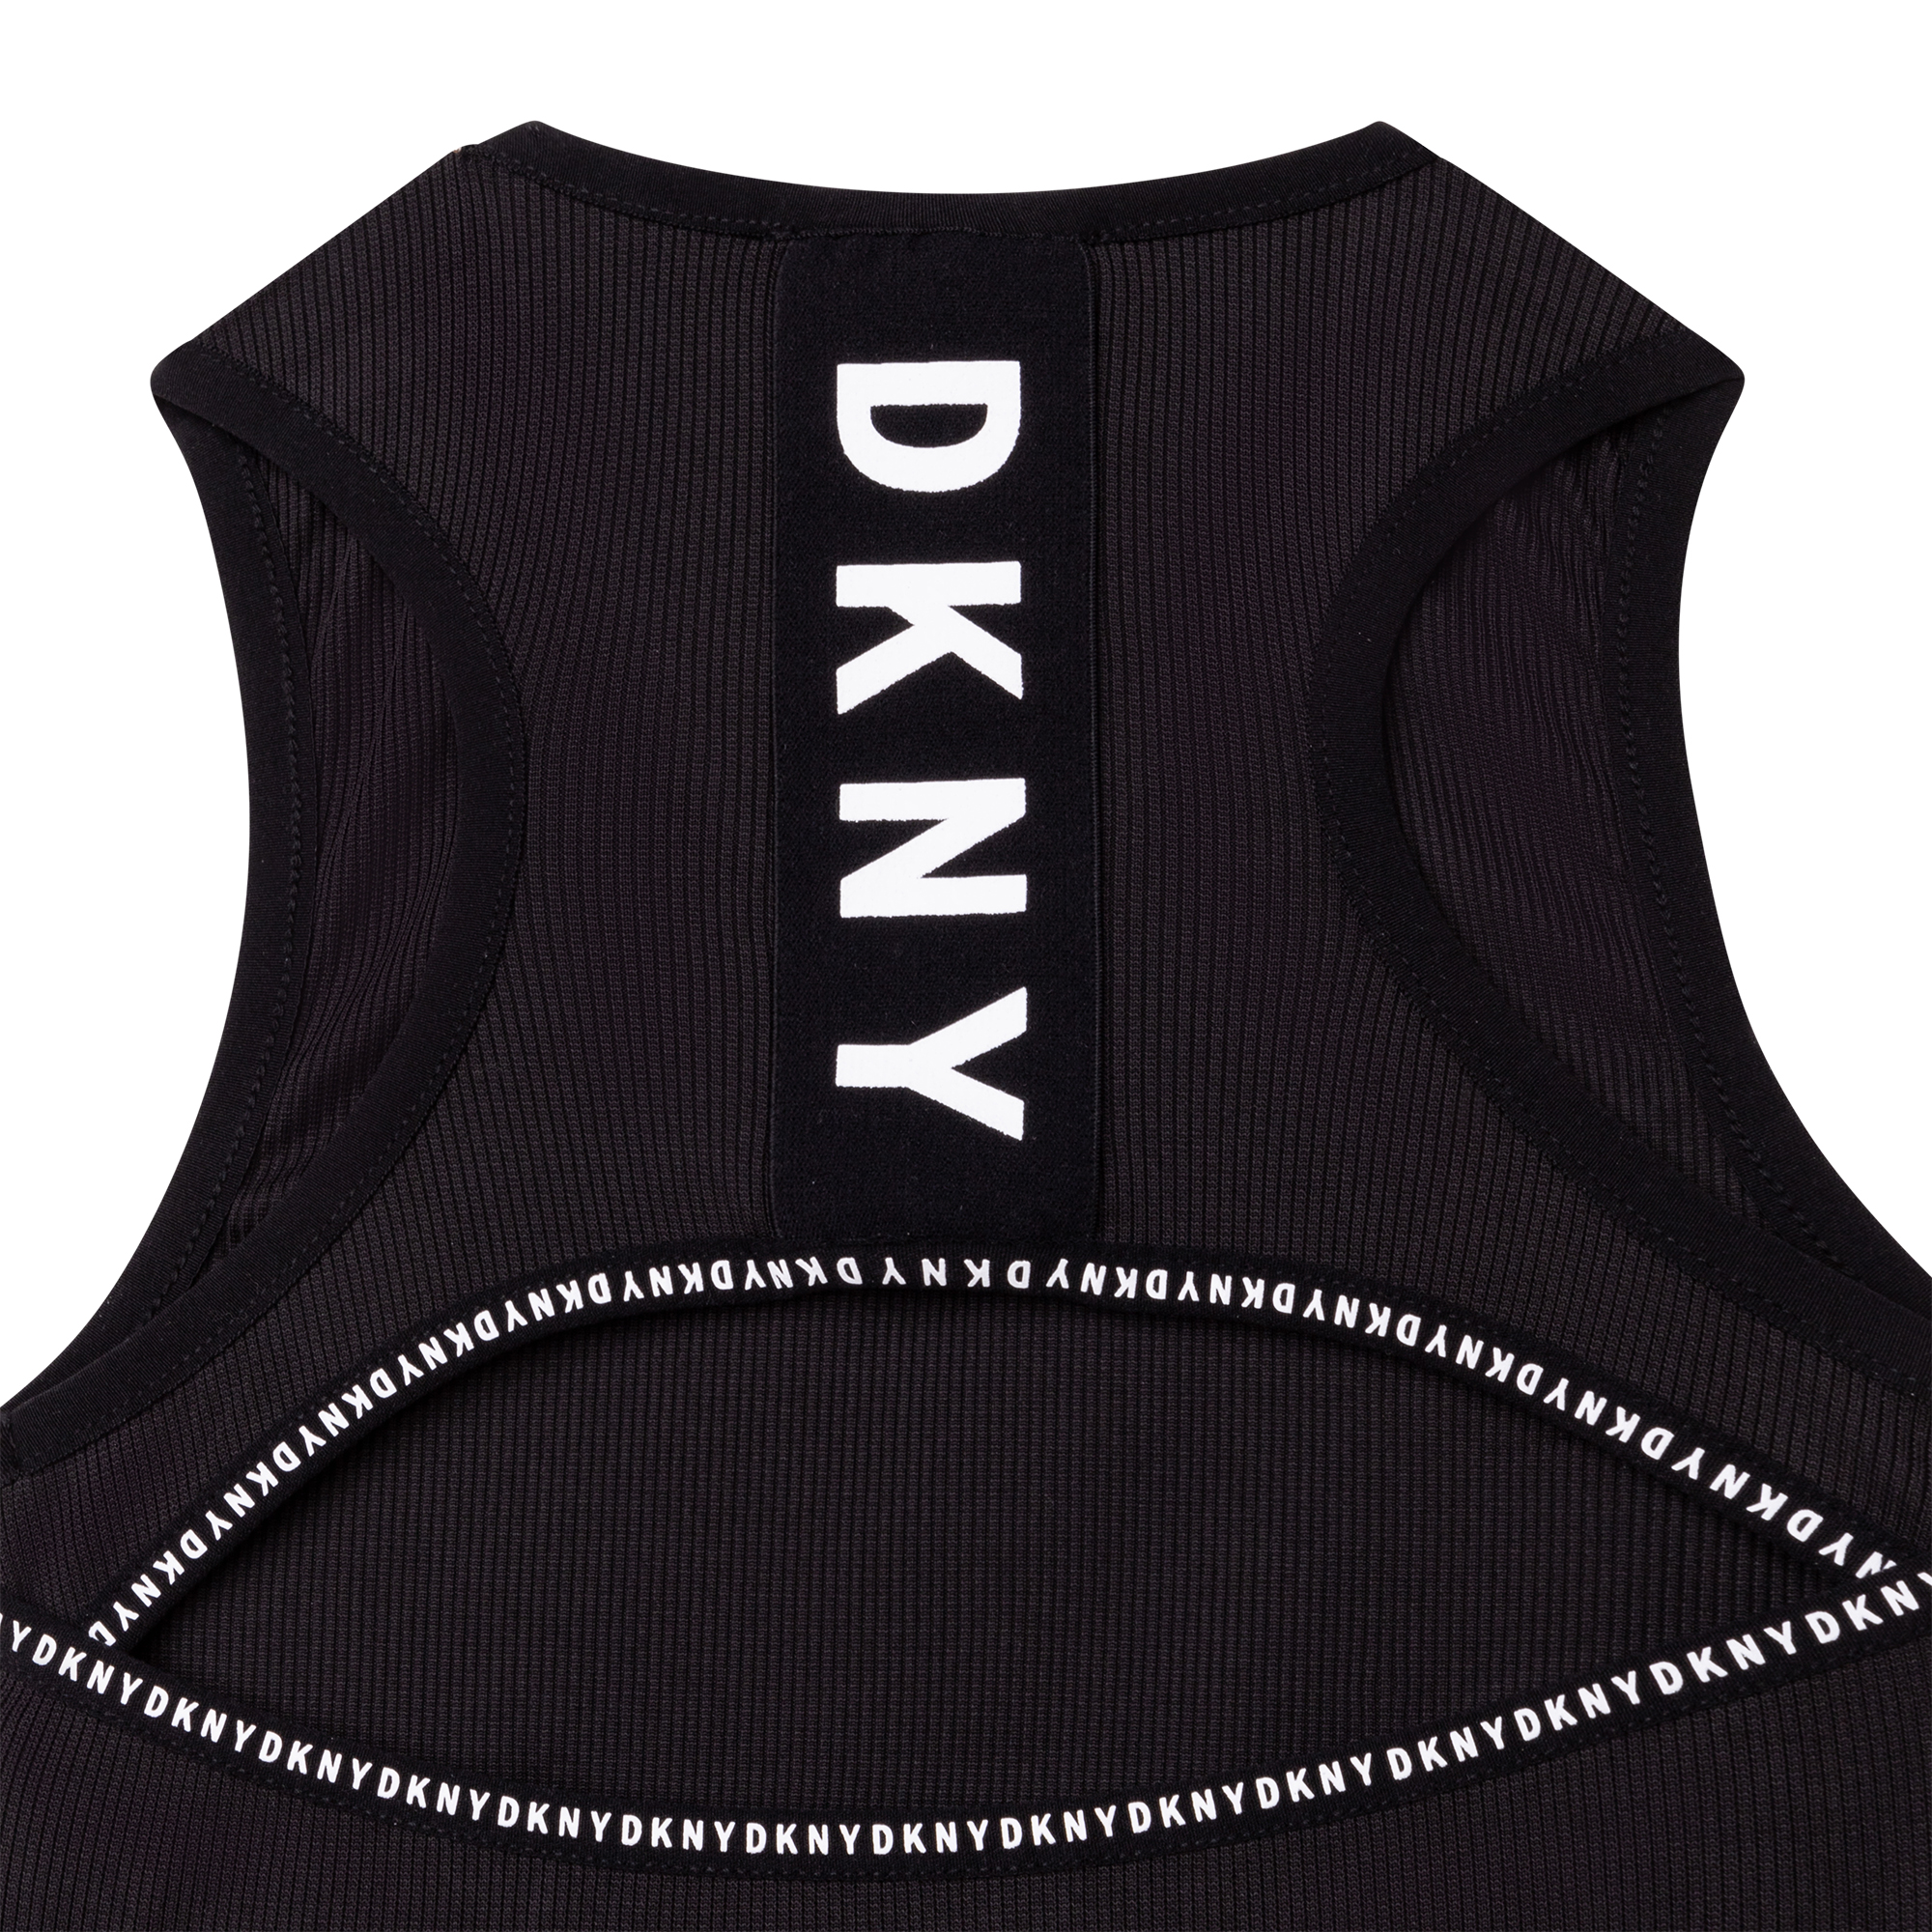 Vest top with decorative back DKNY for GIRL